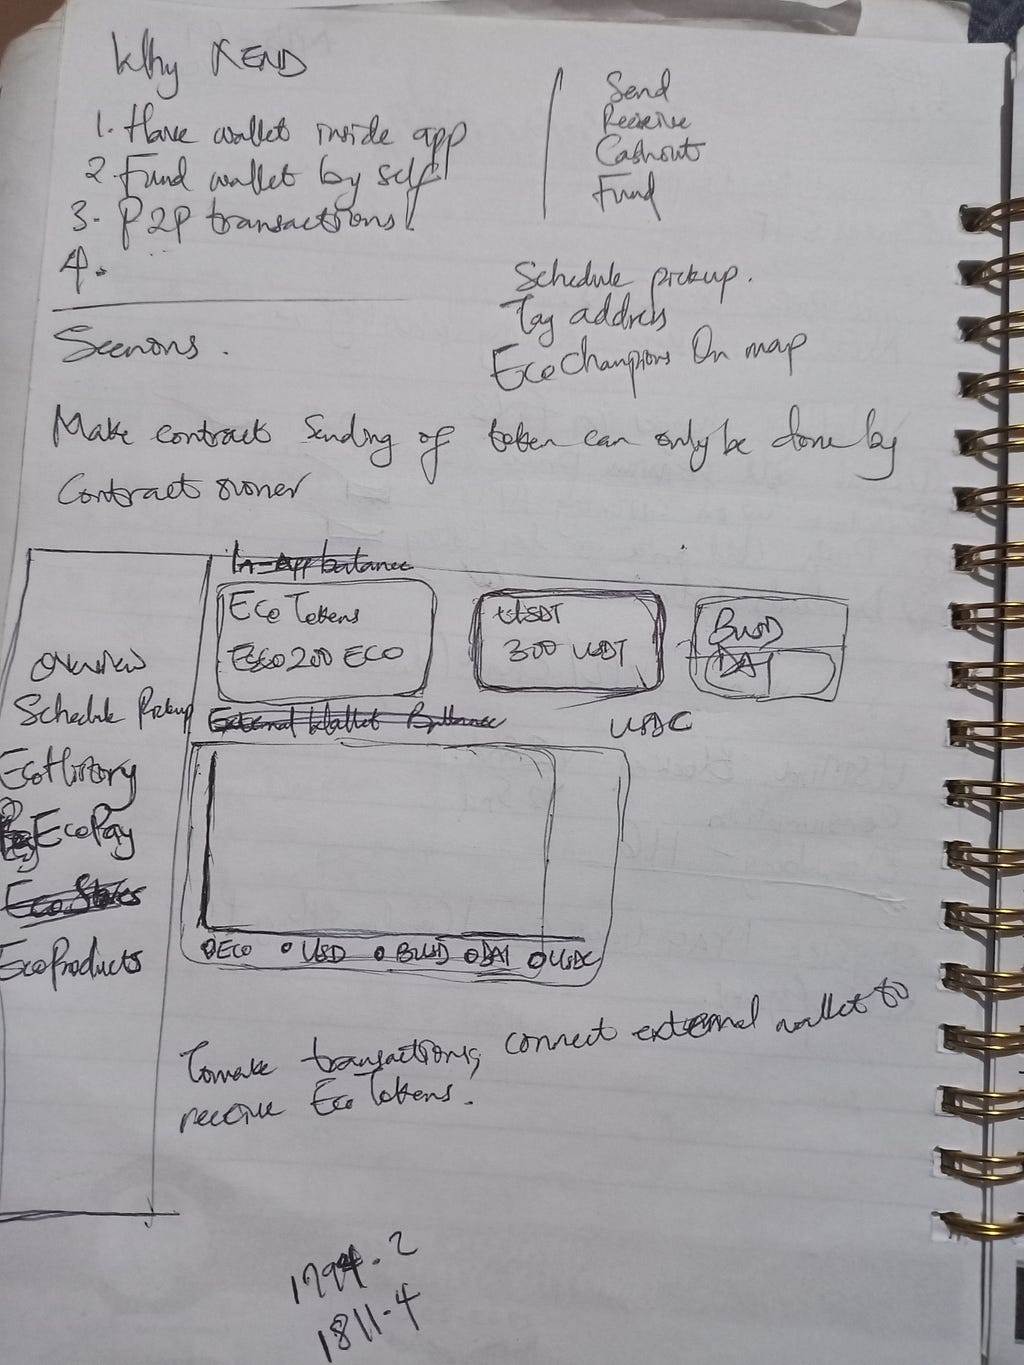 Scribbles on jotter showing rough sketch of EcoCycle and other services to consume in the application